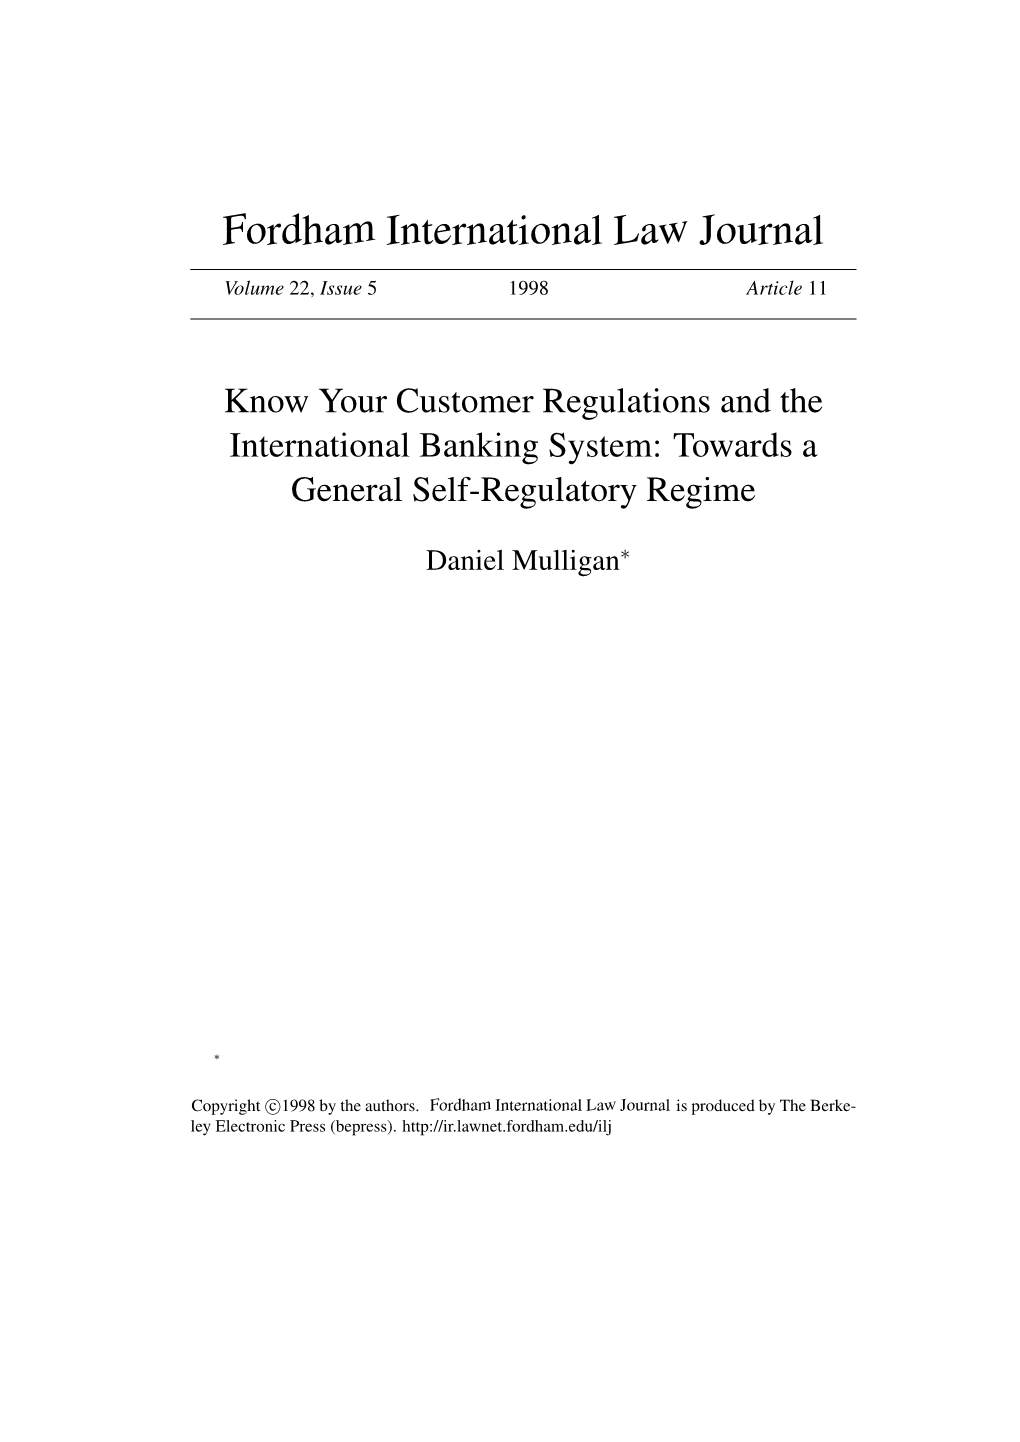 Know Your Customer Regulations and the International Banking System: Towards a General Self-Regulatory Regime